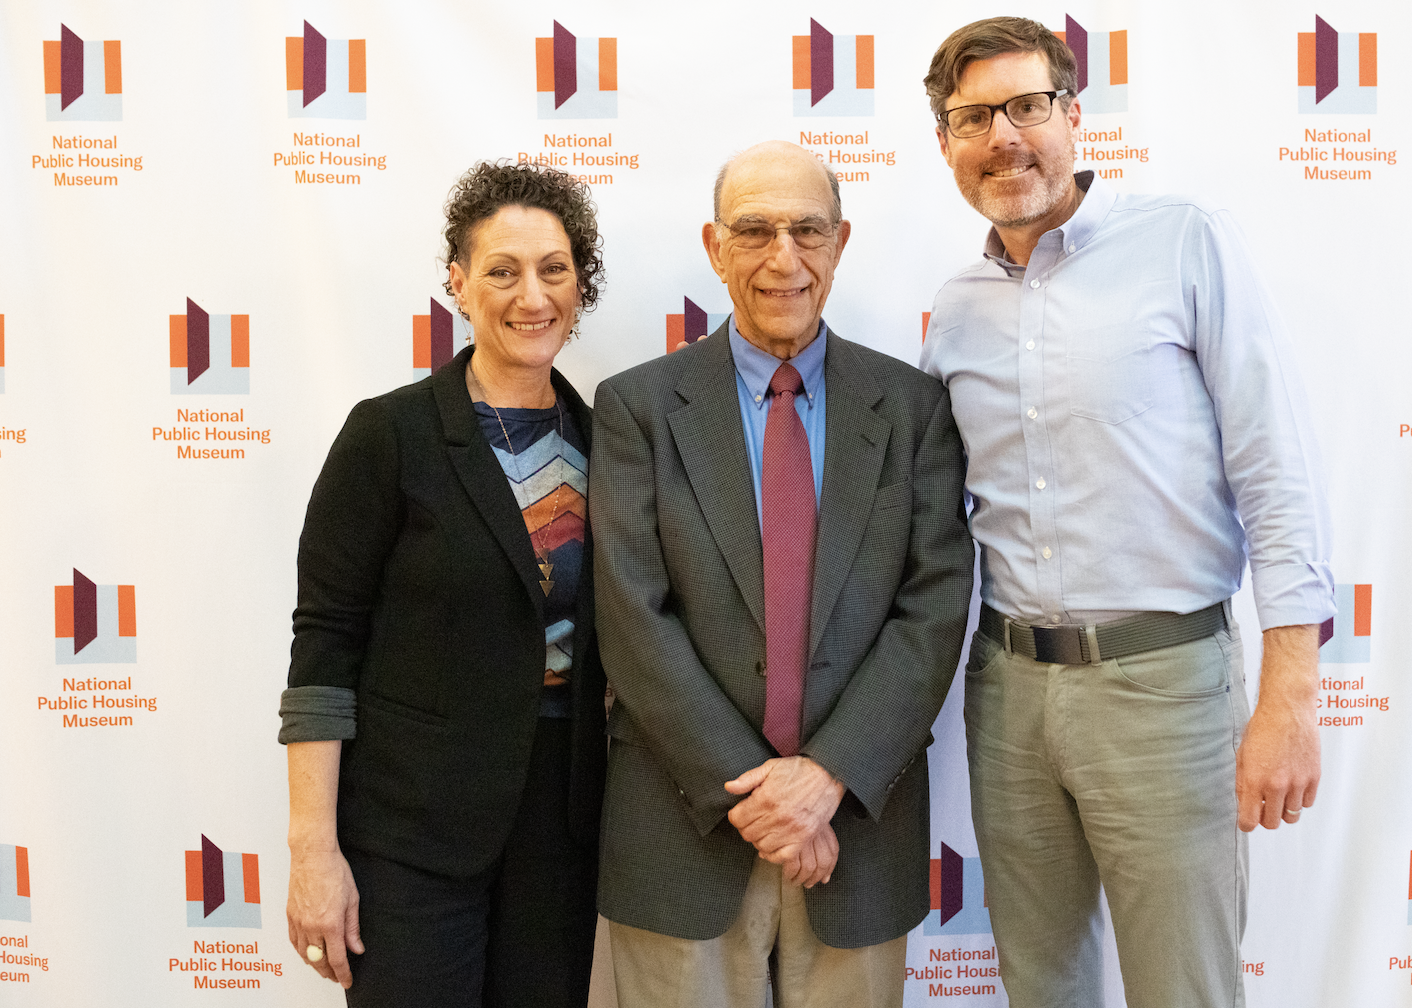  Authors Richard and Leah Rothstein stand next to co-founder of btcRE, M. Ryan Gorman, the sponsor of the event. They all stand in front of a branded white banner with small National Public Housing Museum logos repeated across it.  